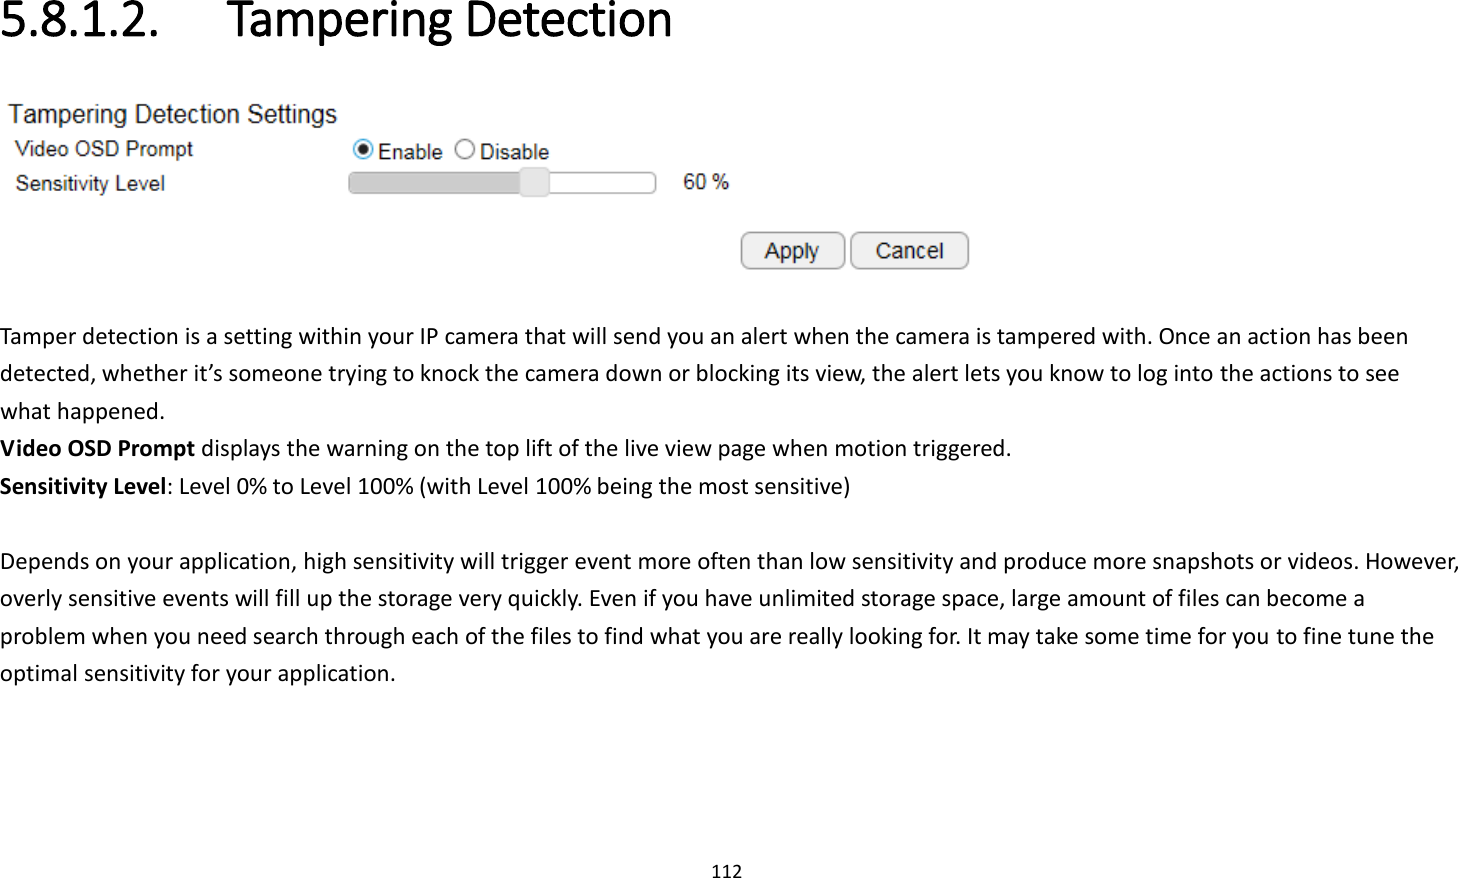 112  5.8.1.2.   Tampering Detection   Tamper detection is a setting within your IP camera that will send you an alert when the camera is tampered with. Once an action has been detected, whether it’s someone trying to knock the camera down or blocking its view, the alert lets you know to log into the actions to see what happened. Video OSD Prompt displays the warning on the top lift of the live view page when motion triggered. Sensitivity Level: Level 0% to Level 100% (with Level 100% being the most sensitive)  Depends on your application, high sensitivity will trigger event more often than low sensitivity and produce more snapshots or videos. However, overly sensitive events will fill up the storage very quickly. Even if you have unlimited storage space, large amount of files can become a problem when you need search through each of the files to find what you are really looking for. It may take some time for you to fine tune the optimal sensitivity for your application.   